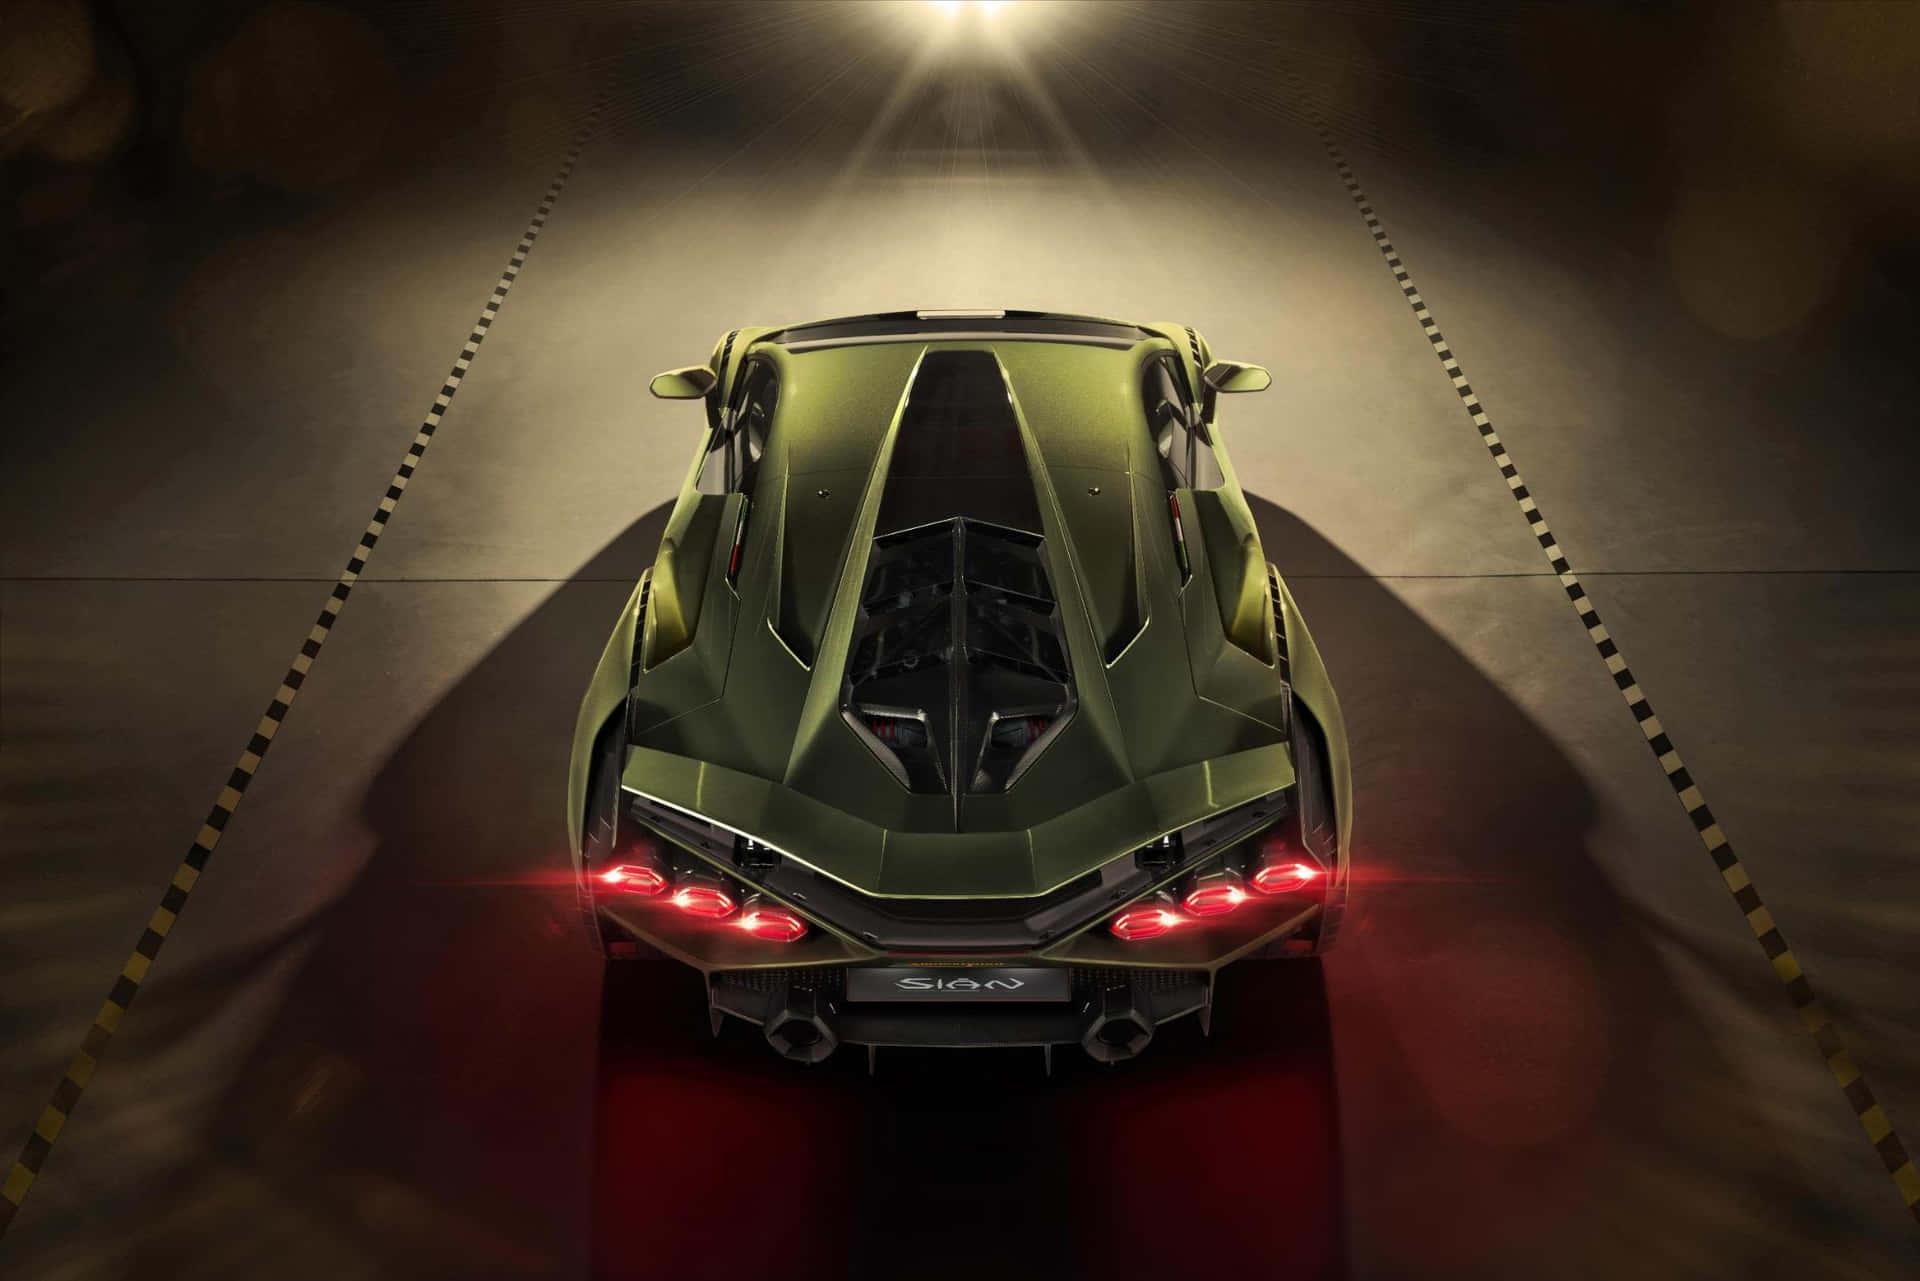 The Green Sports Car Is In The Dark